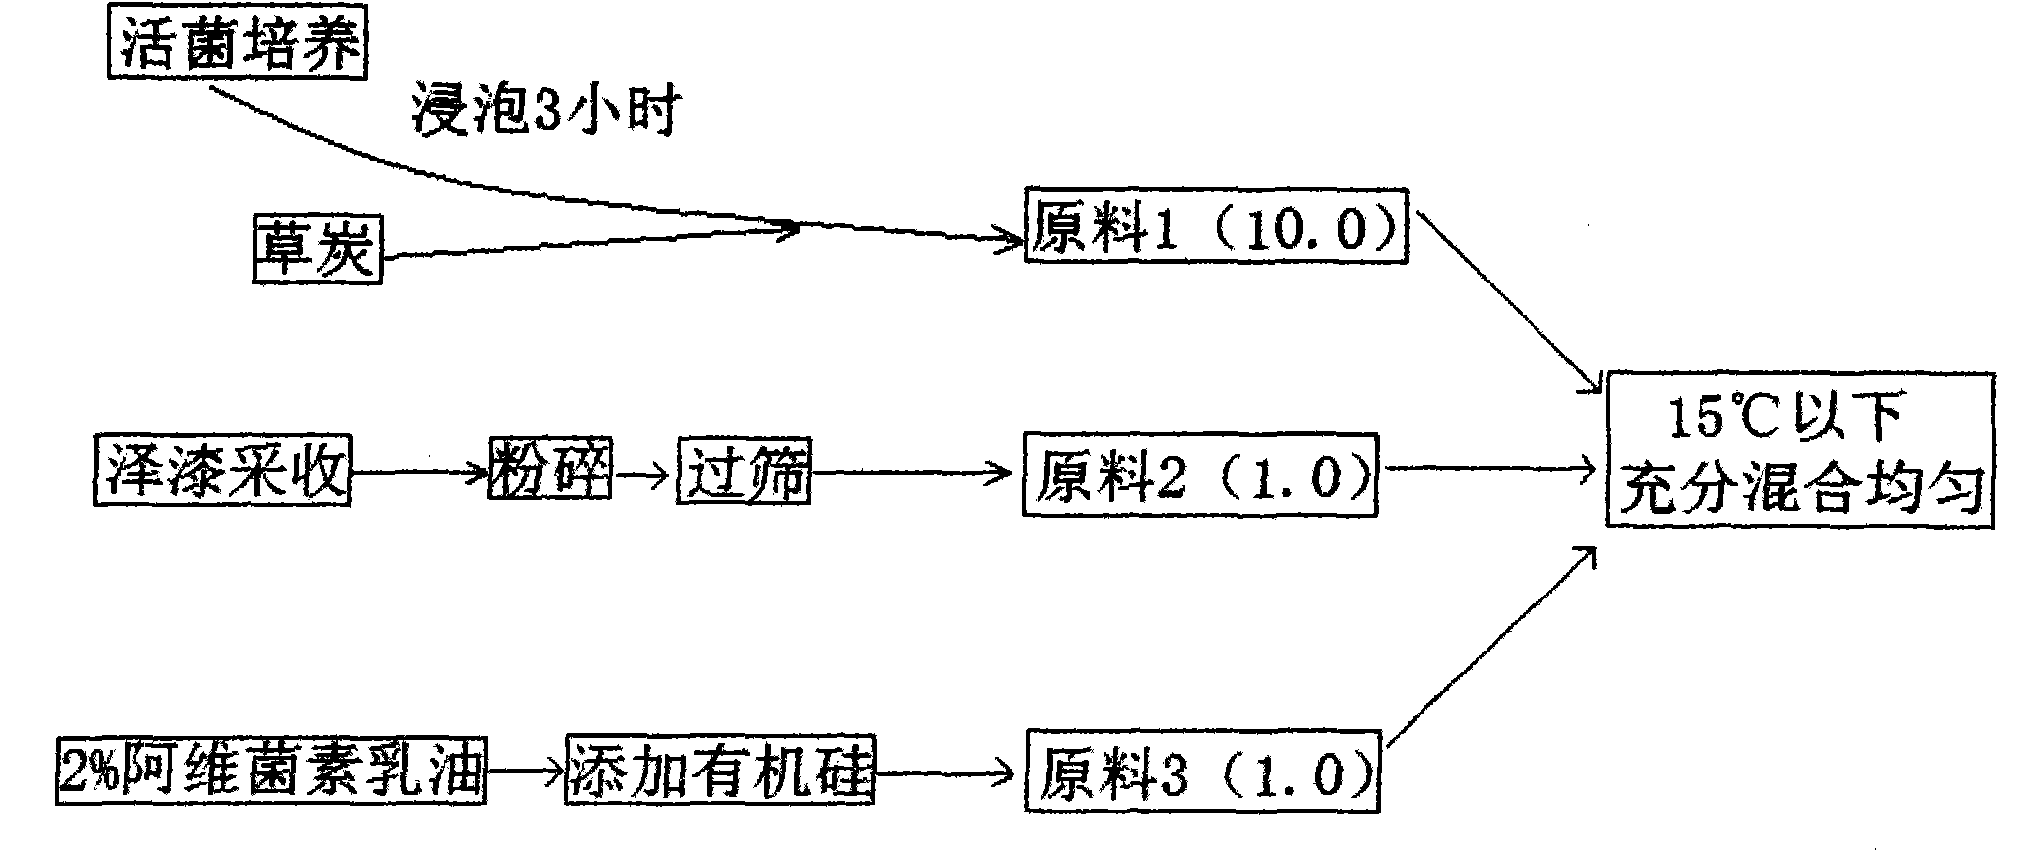 Nematode controlling reagent and production flow thereof